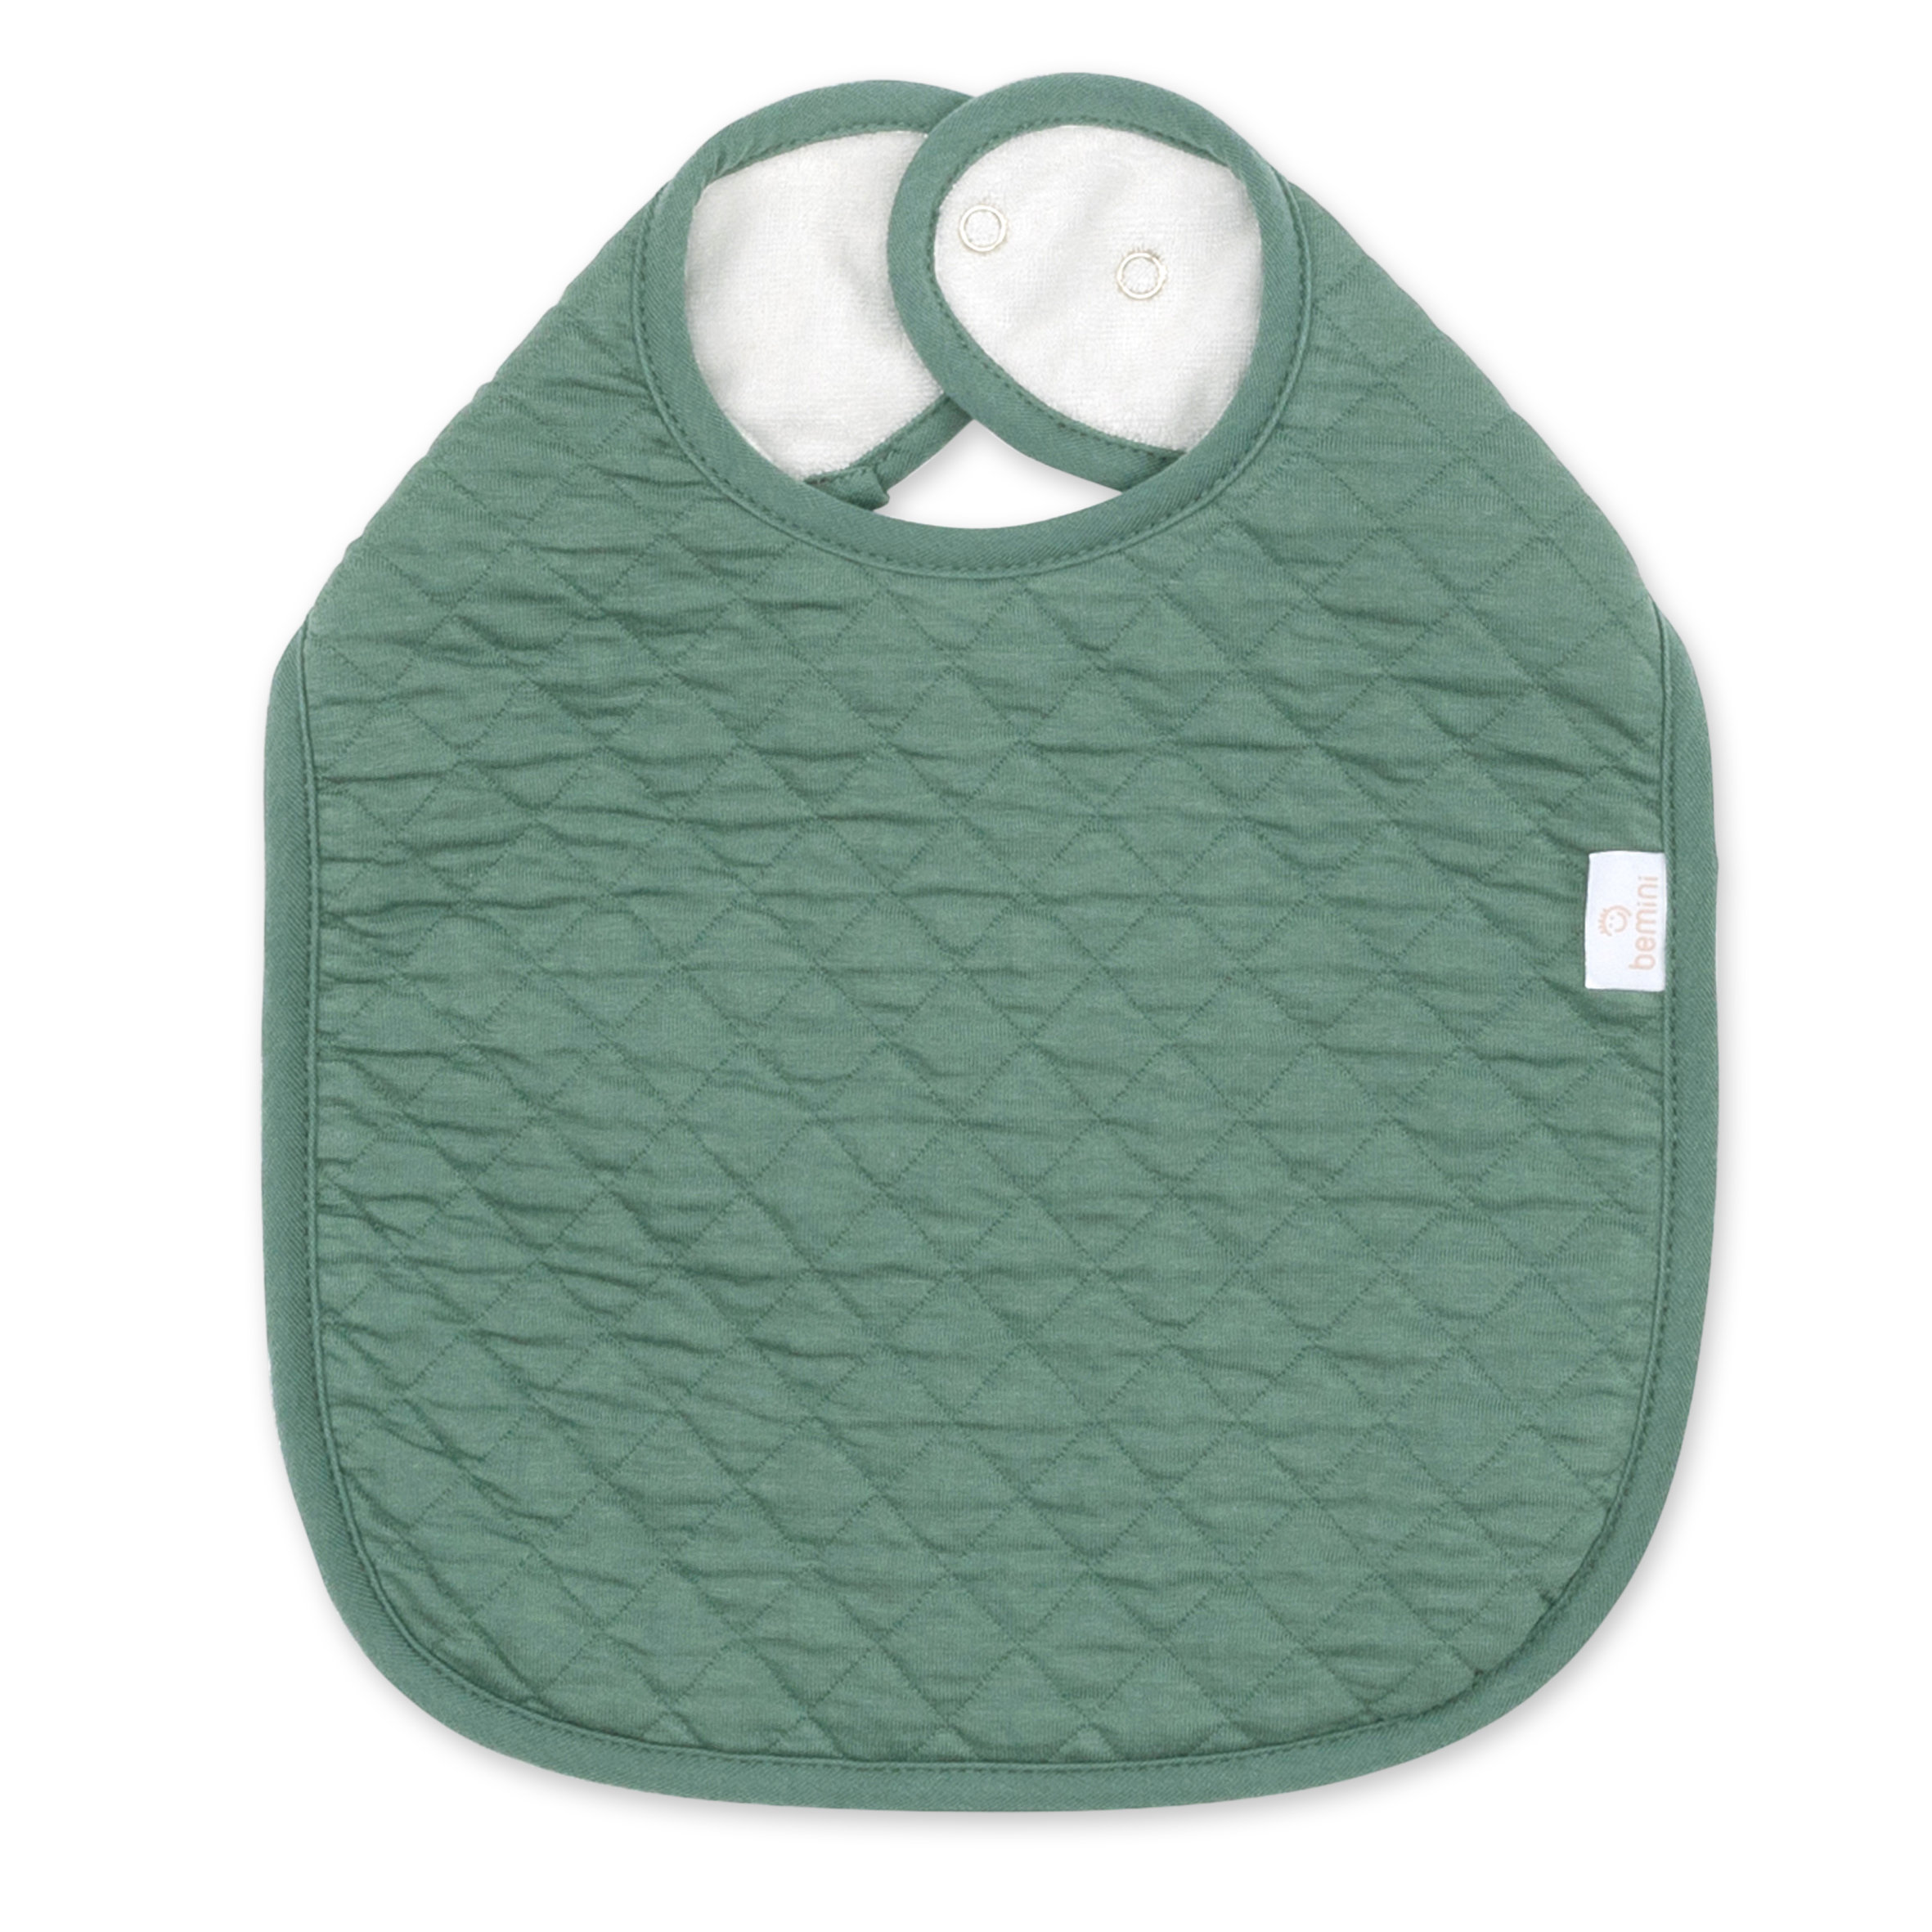 Bavoir waterproof Pady quilted jersey 37cm QUILT Green